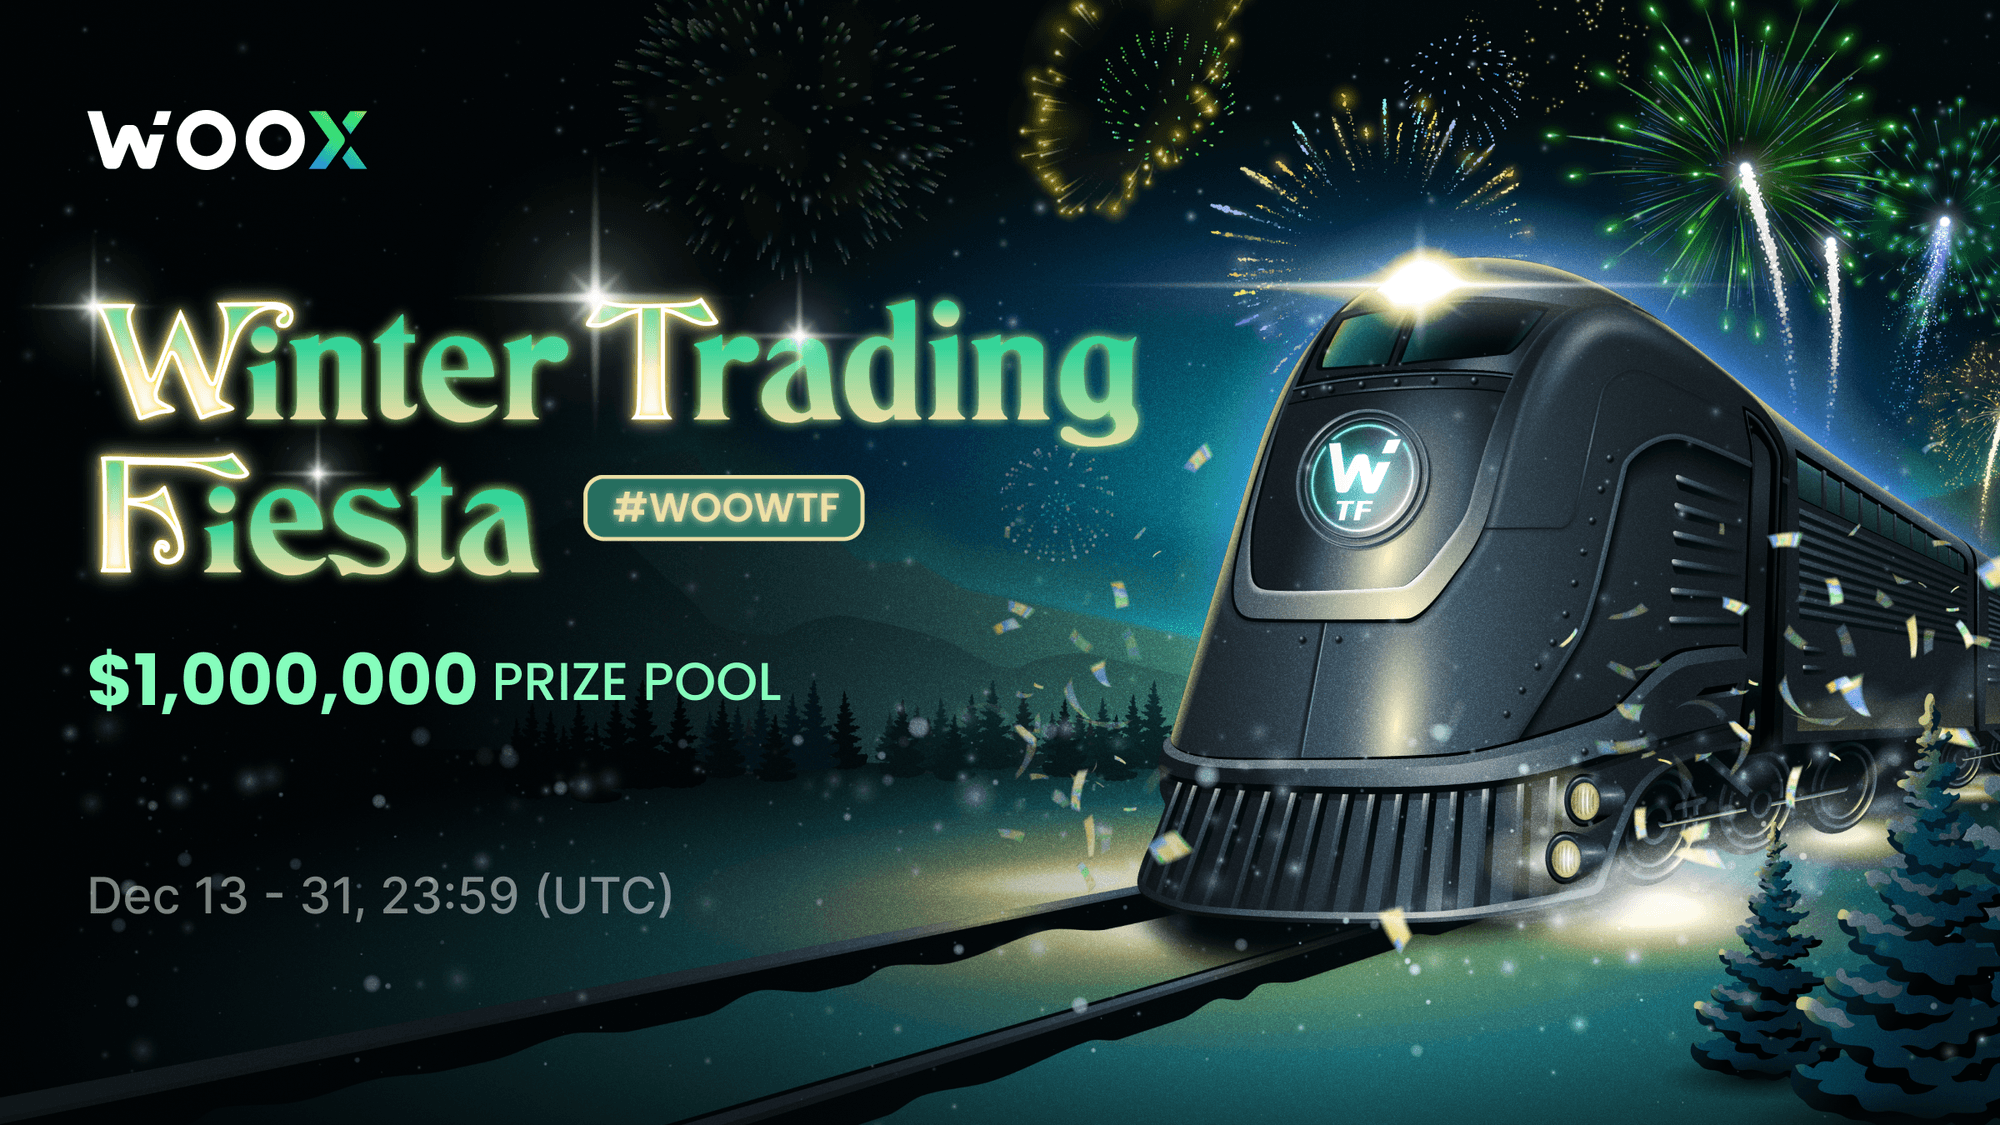 WOO X Winter Trading Fiesta launches with up to a $1M prize pool - #WOOWTF